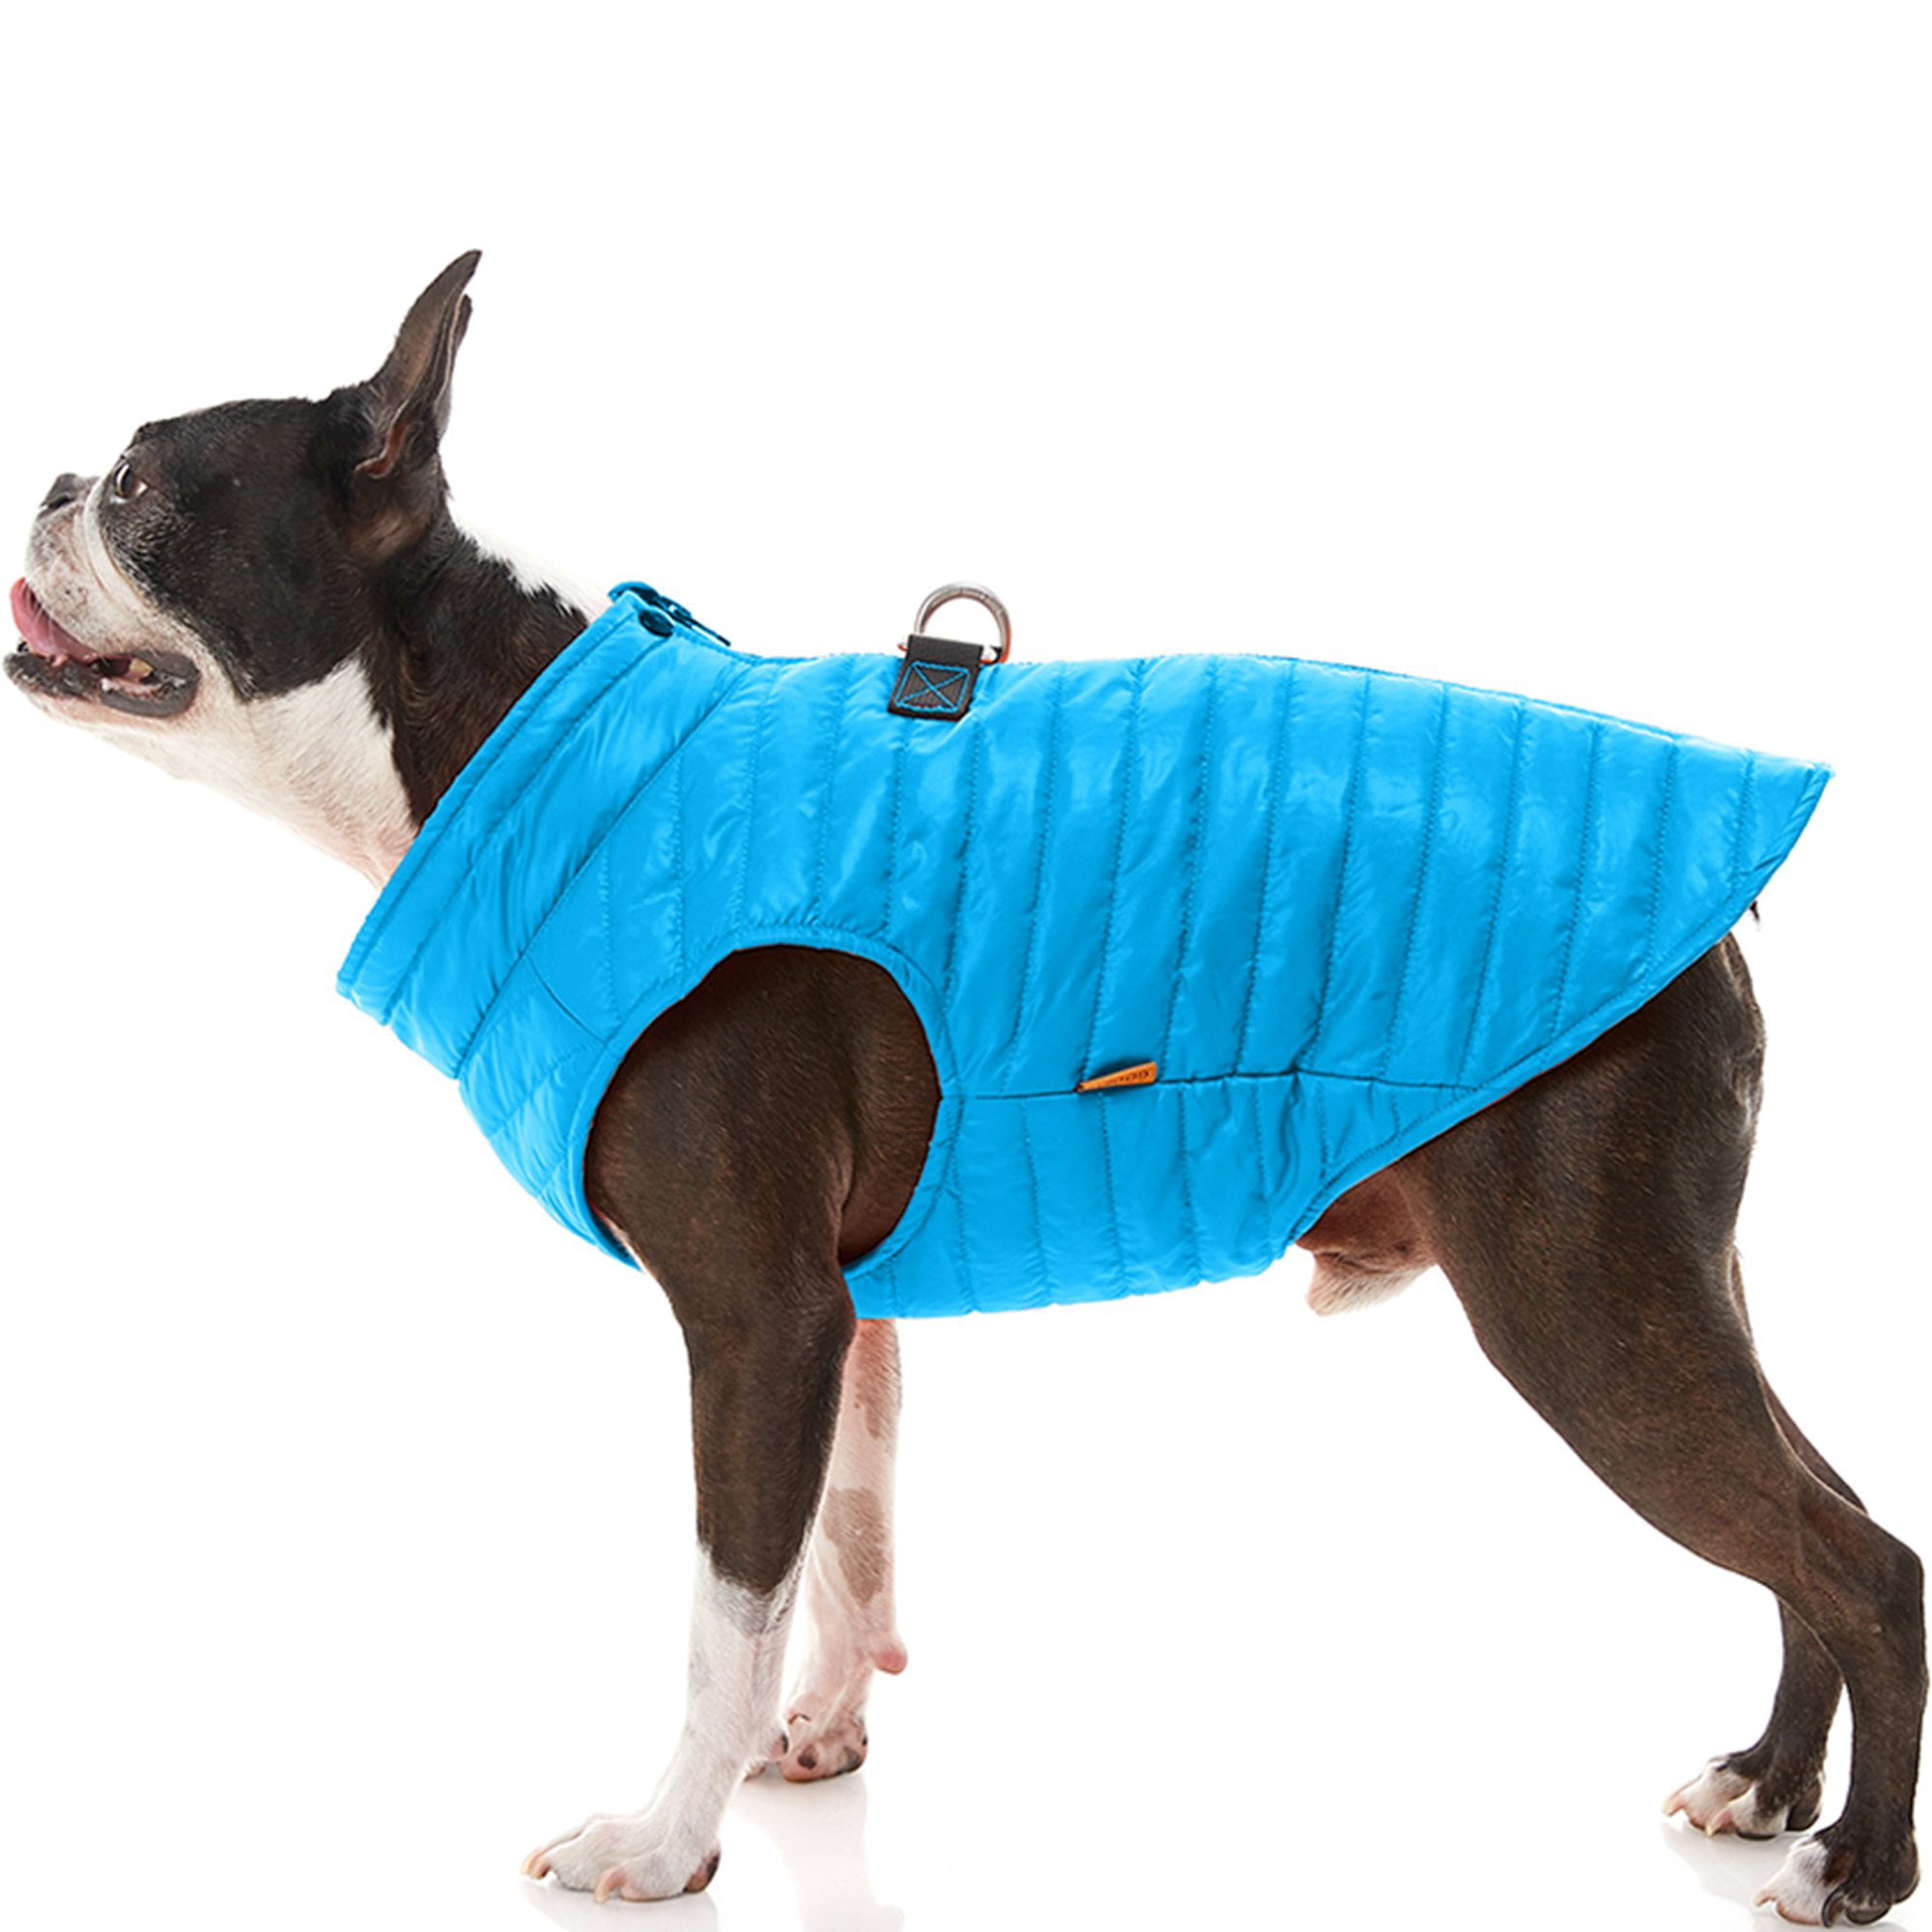 Gooby Puffer Vest Dog Jacket - Blue, Large - Ultra Thin Zip Up Wind Breaker  with Dual D Ring Leash Water Resistant Small Dog Sweater